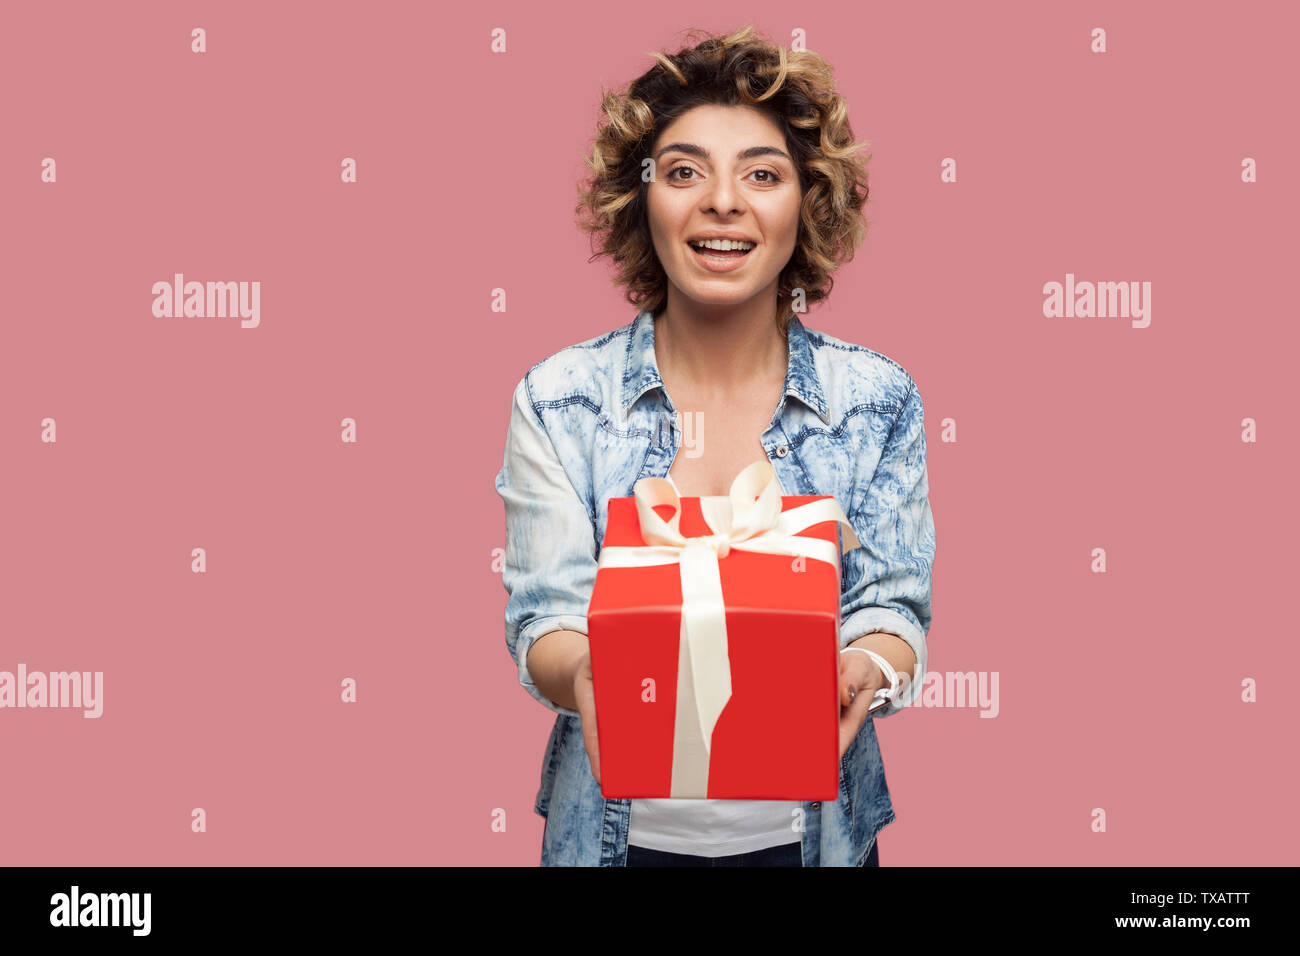 Portrait of happy beautiful young woman in blue shirt with curlty hairstyle standing and giving you red gift box with toothy smile, looking at camera. Stock Photo